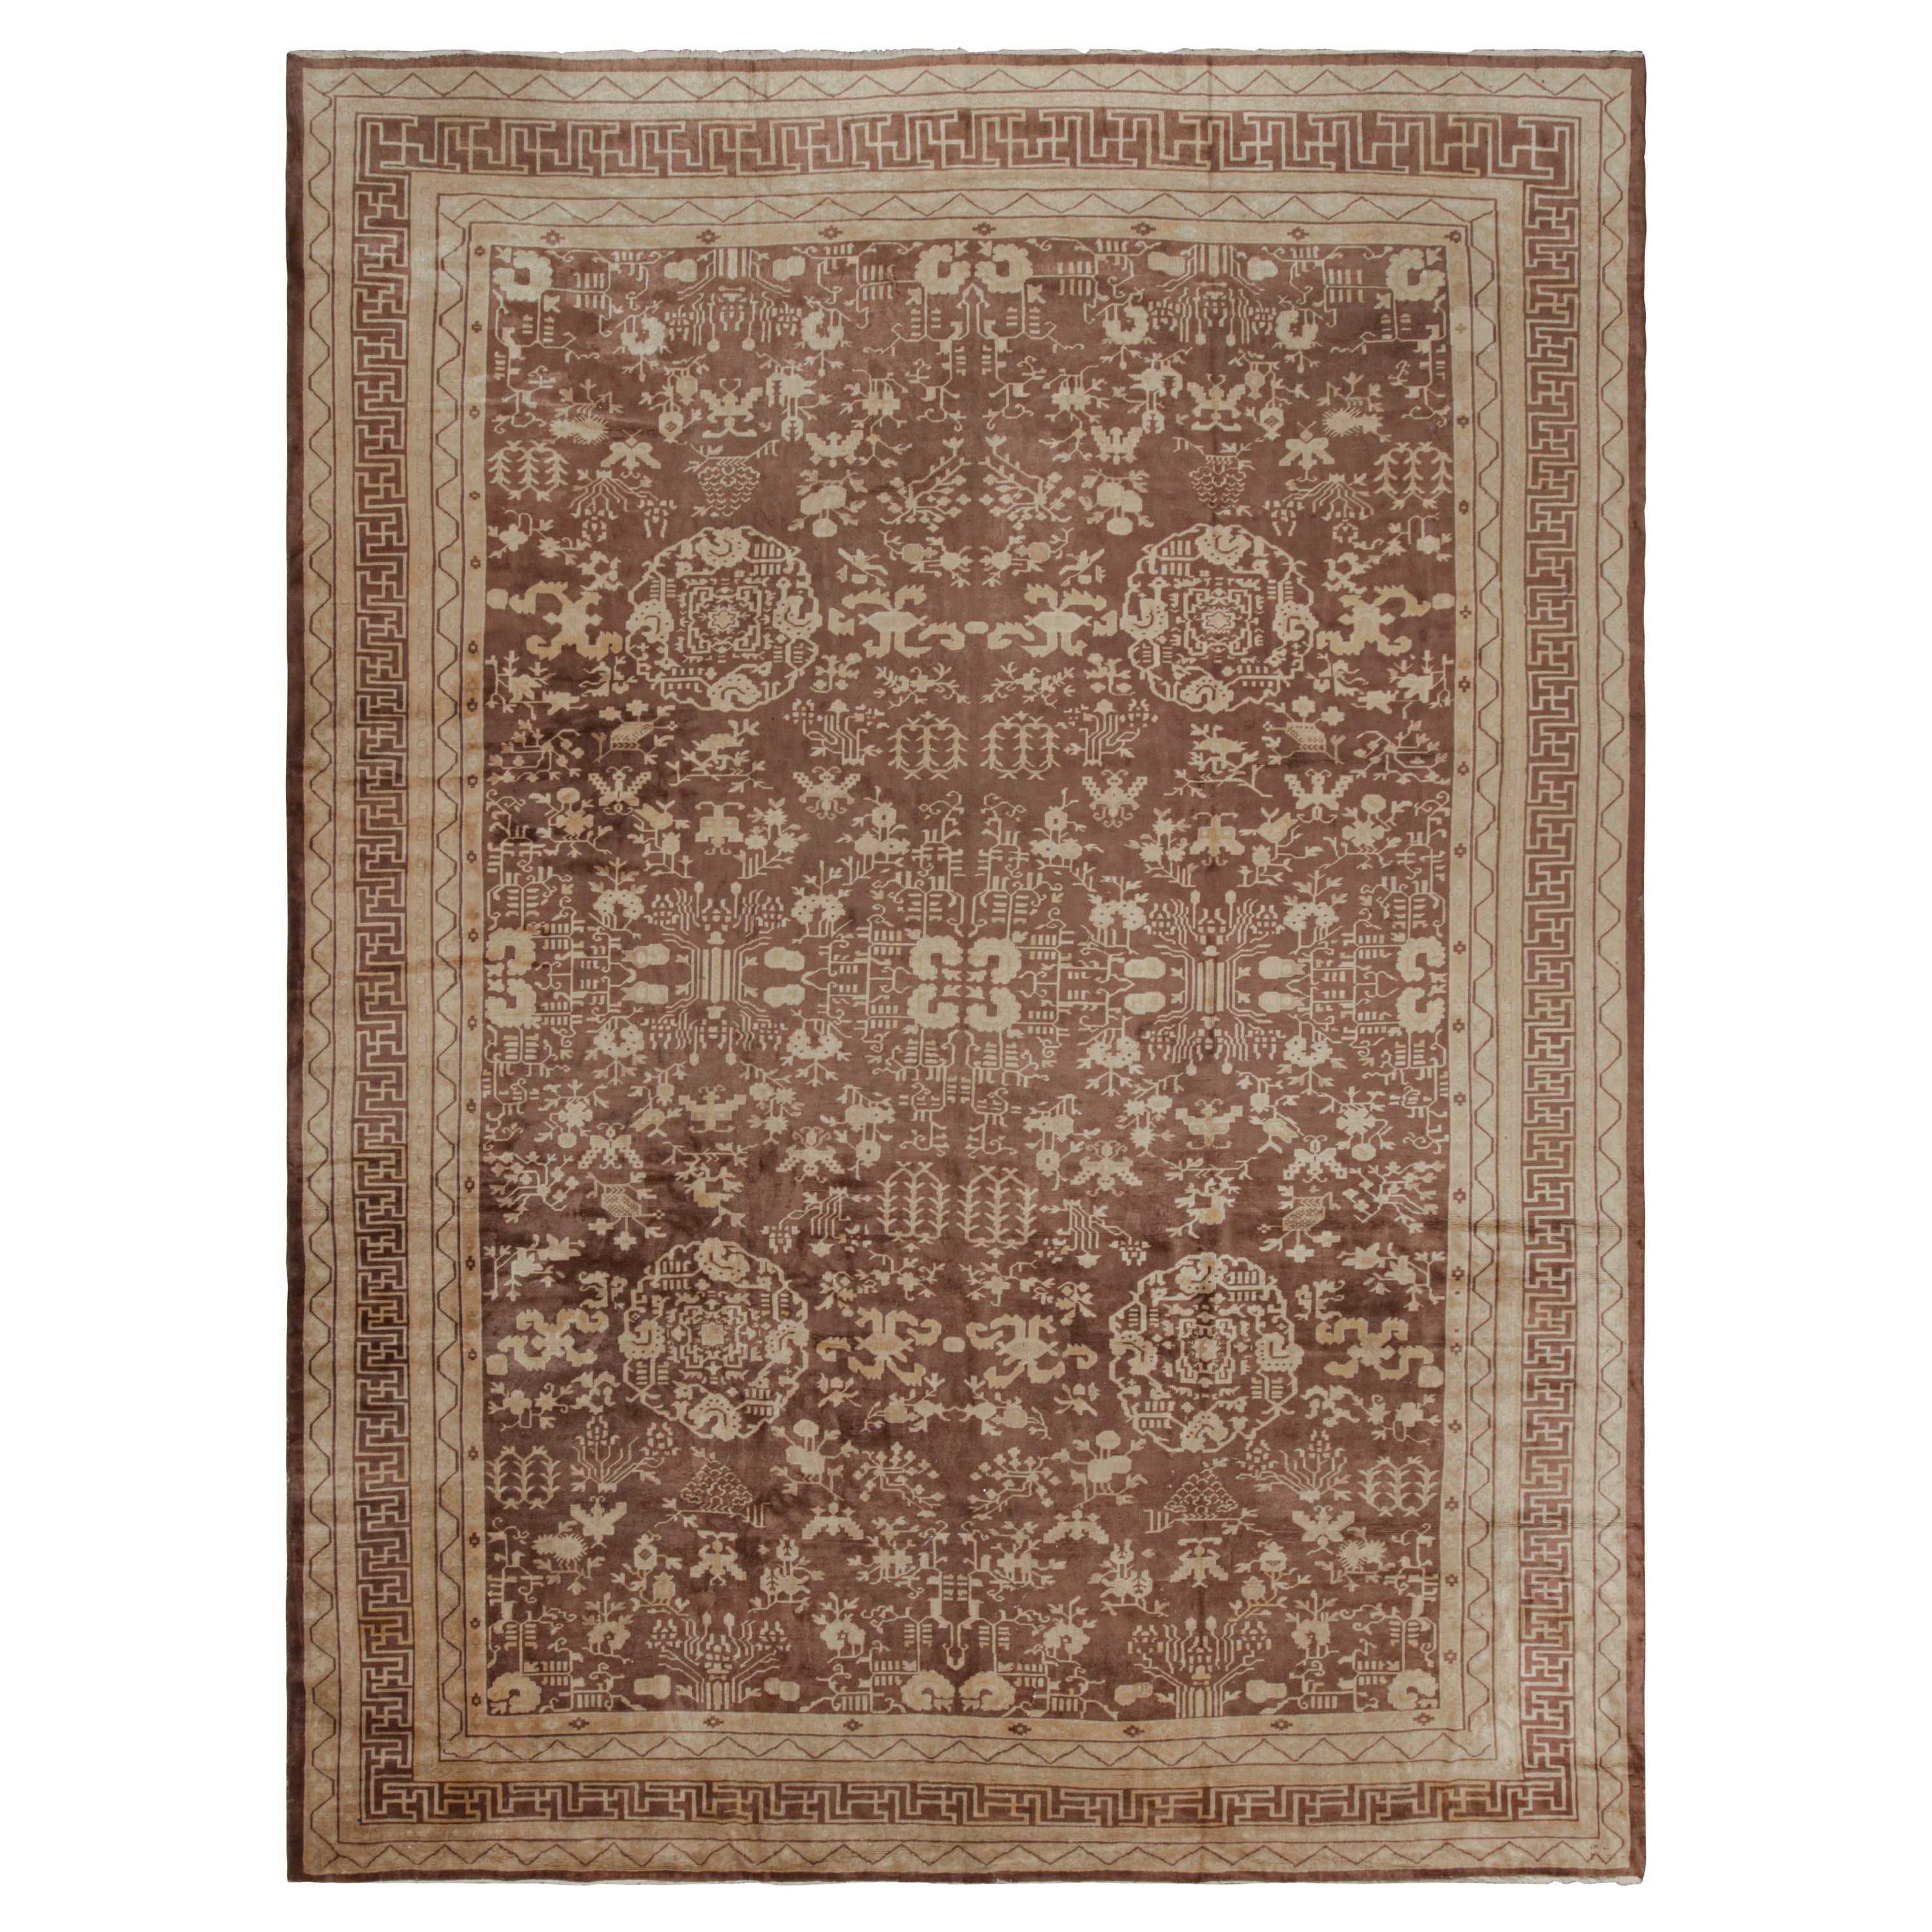 Antique Samarkand Rug in Brown with Gold Patterns, from Rug & Kilim For Sale